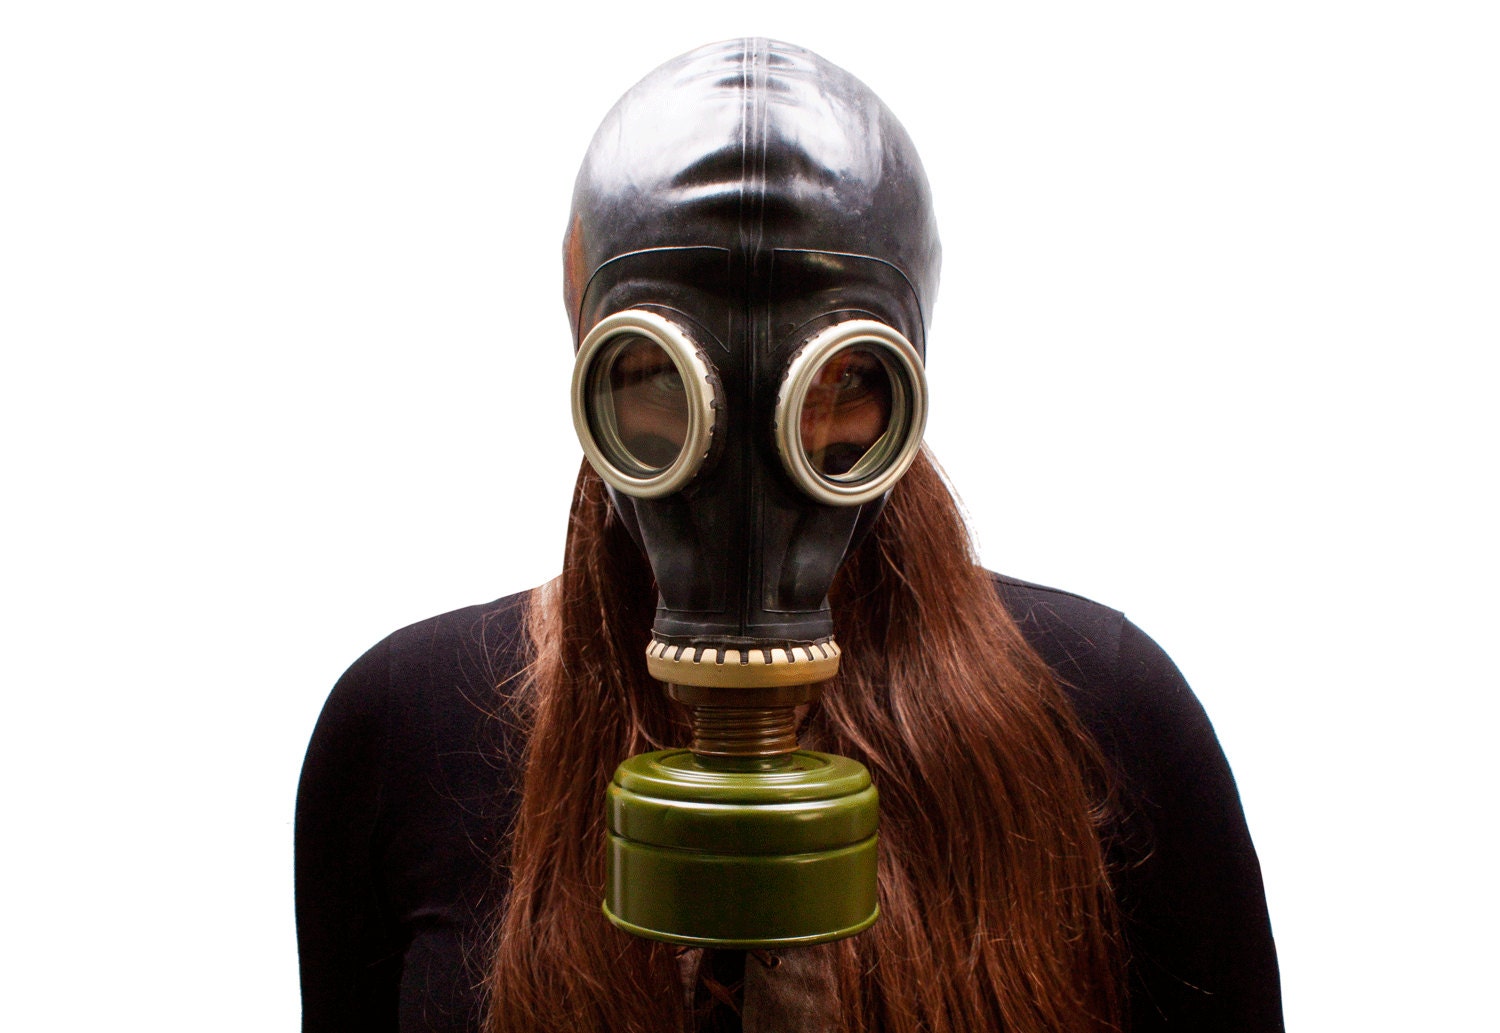 Soviet Gas Mask Gp 5 Scary Gas Mask Was Made In 